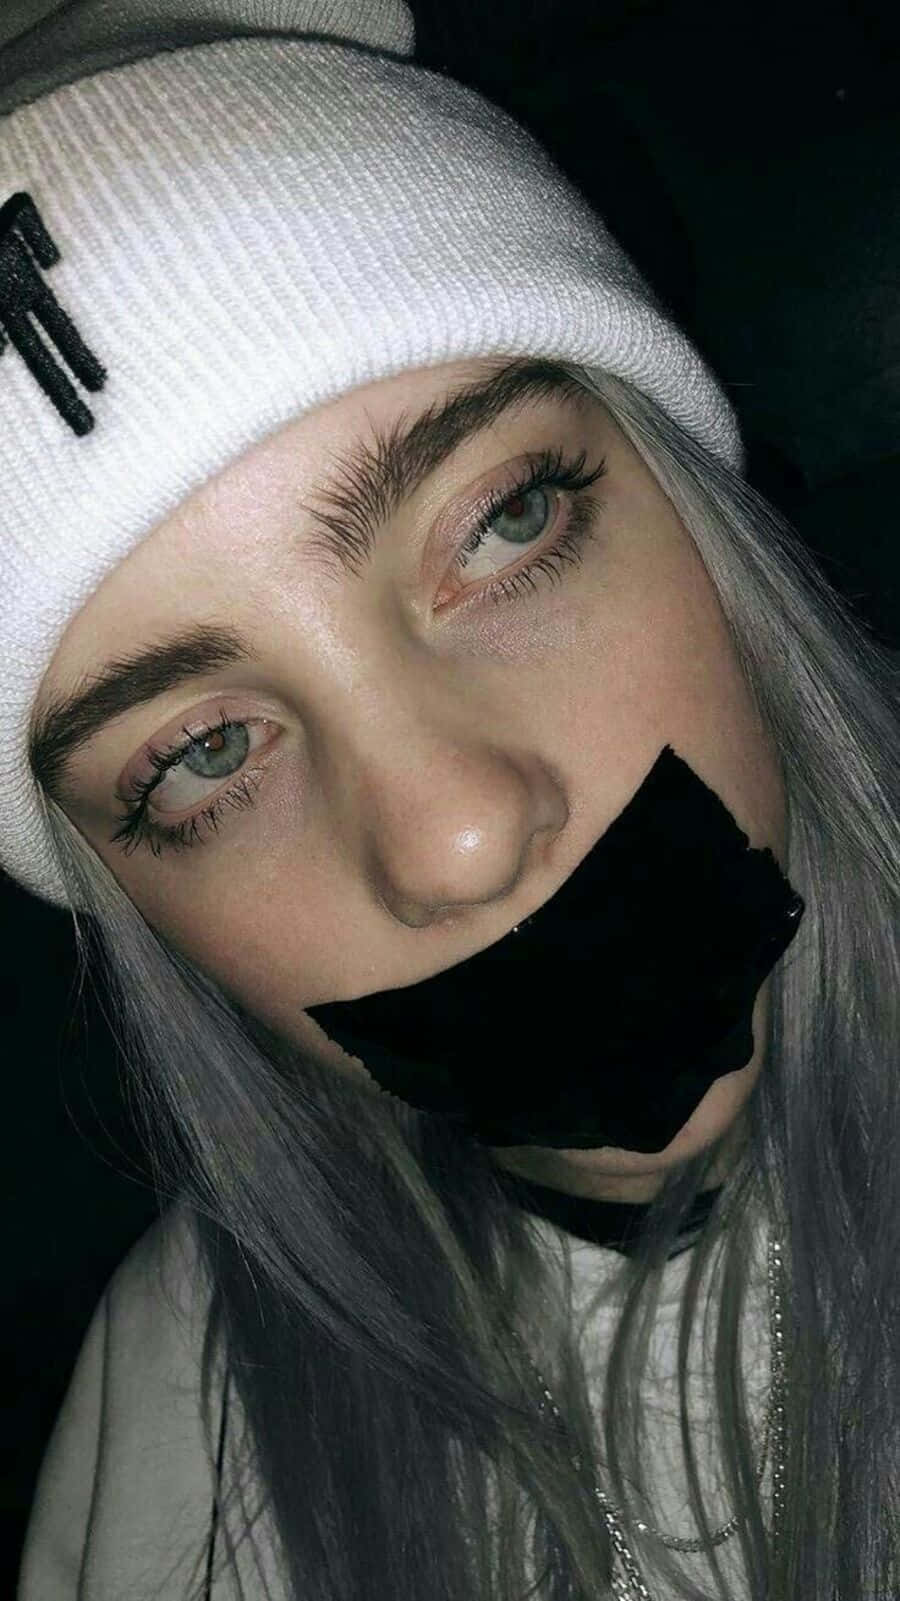 Billie Eilish Sad Expression With Tape Over Mouth Wallpaper